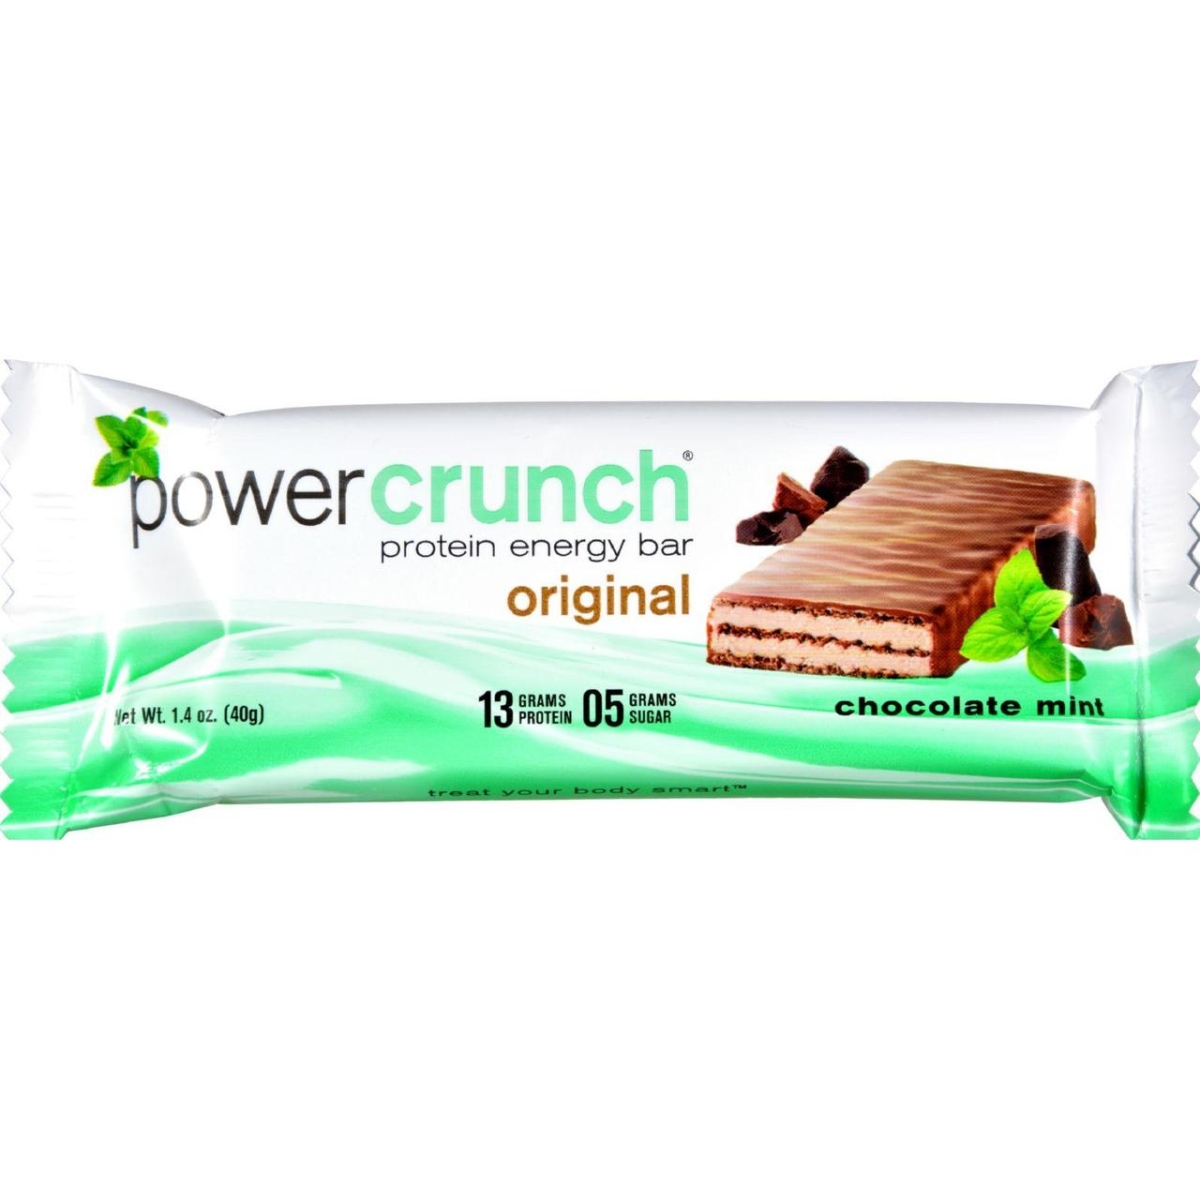 Hg1499854 40g Protein Bars - Chocolate Mint Original, Case Of 12